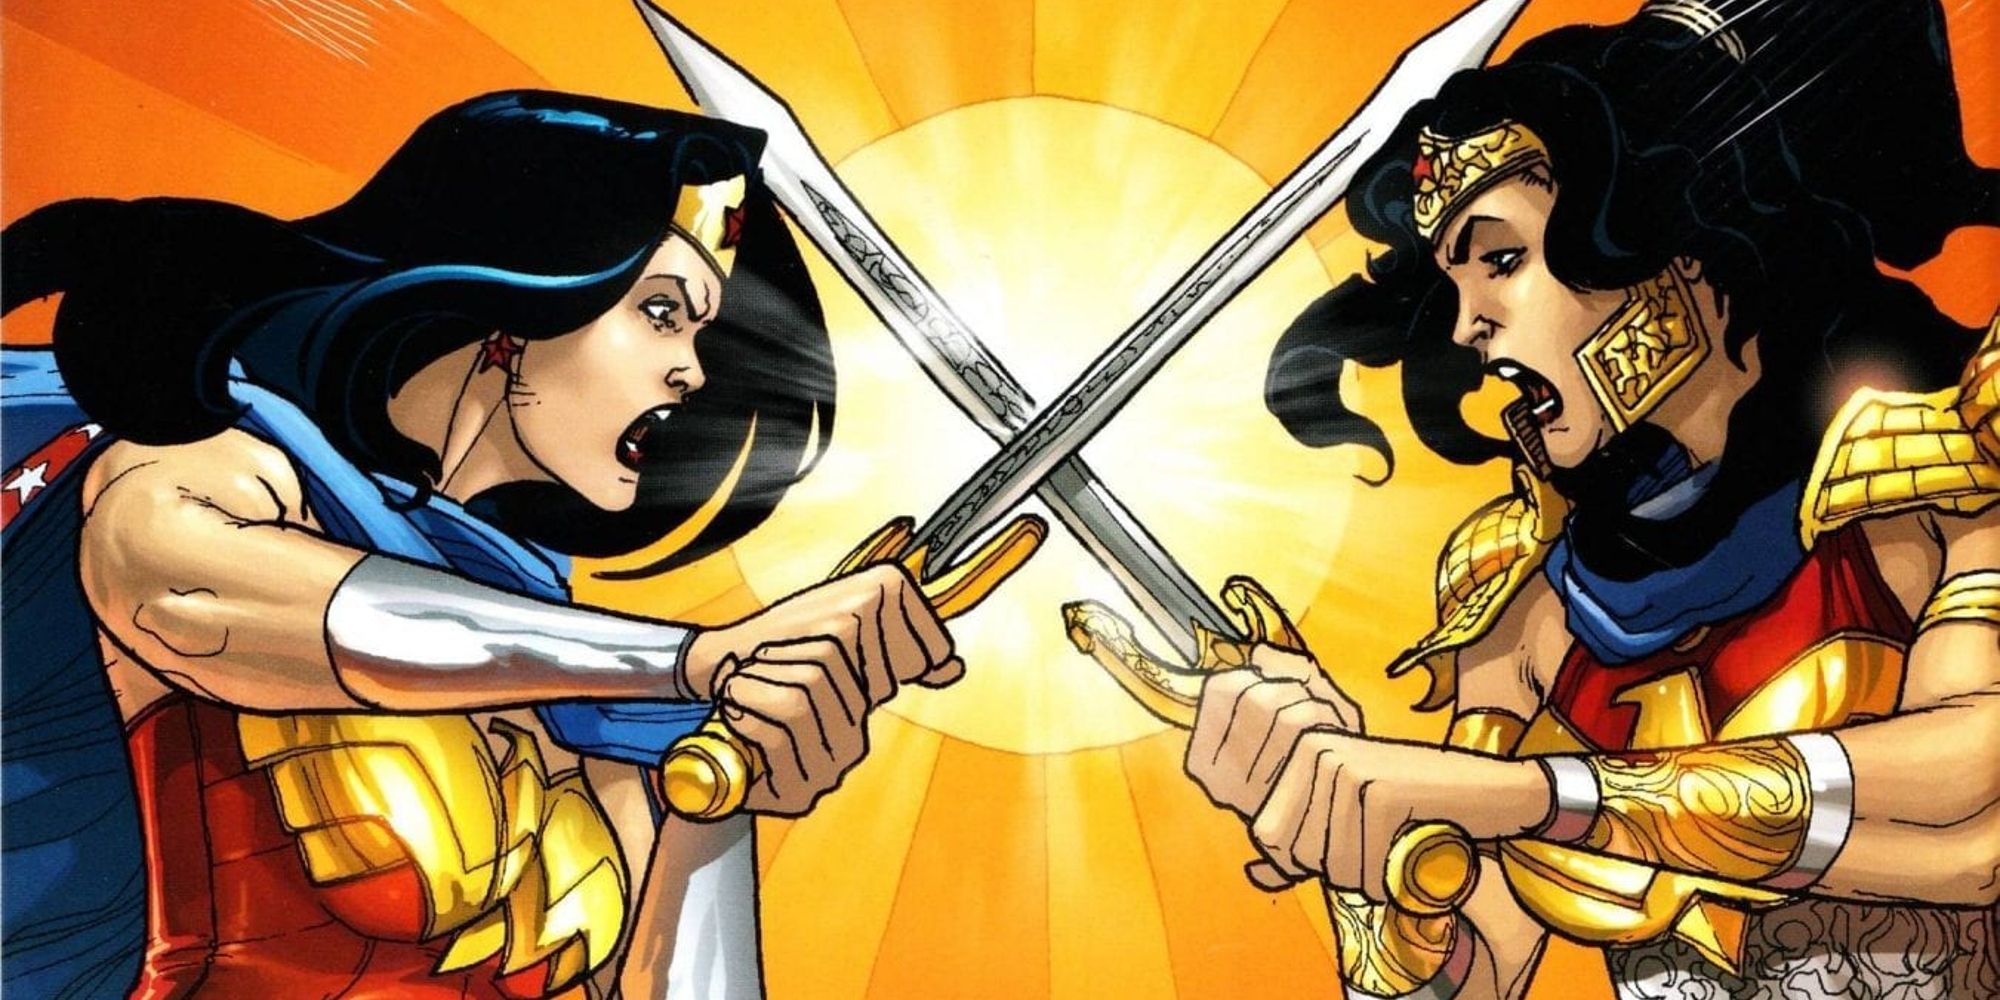 Wonder Woman battling Hippolyta in cover artwork for Amazons Attack